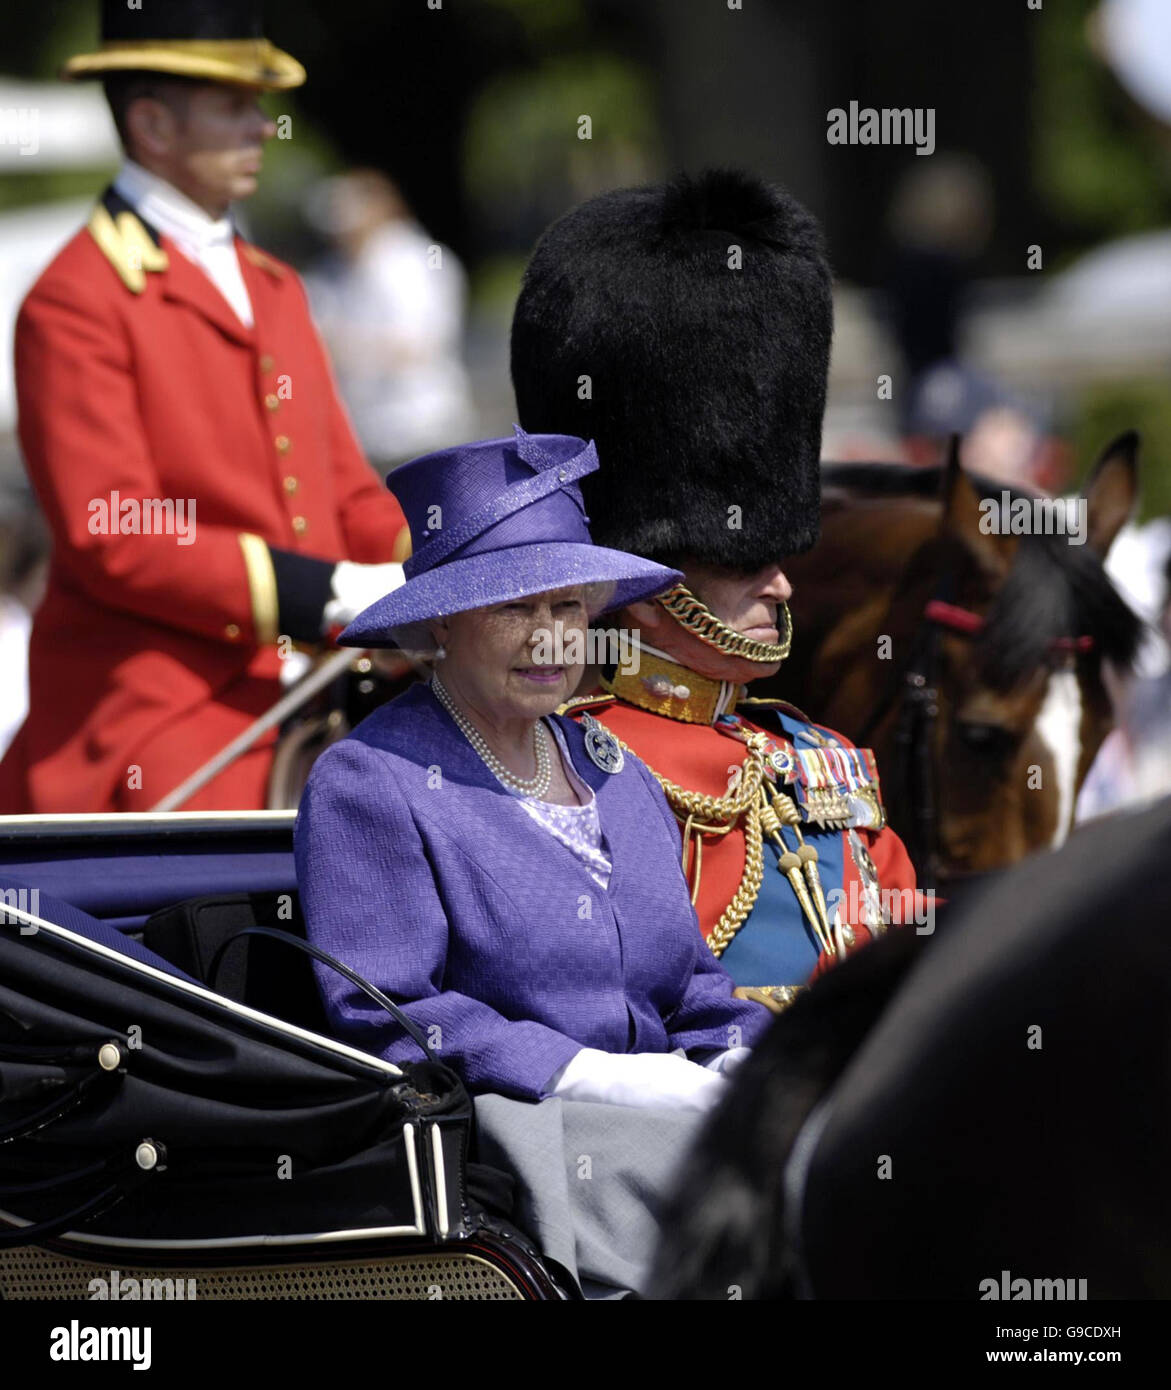 Britain's Queen Elizabeth II and the Duke of Edinburgh leave Buckingham Palace, London, to watch the annual Trooping the Colour ceremony as the Queen celebrates her official 80th birthday. PRESS ASSOCIATION Photo, Picture date: Saturday June 17, 2006. More than 1,100 soldiers will take part in the colourful annual display of pomp and pageantry. See PA story ROYAL Queen. Photo credit should read: Andrew Stuart /PA. Stock Photo